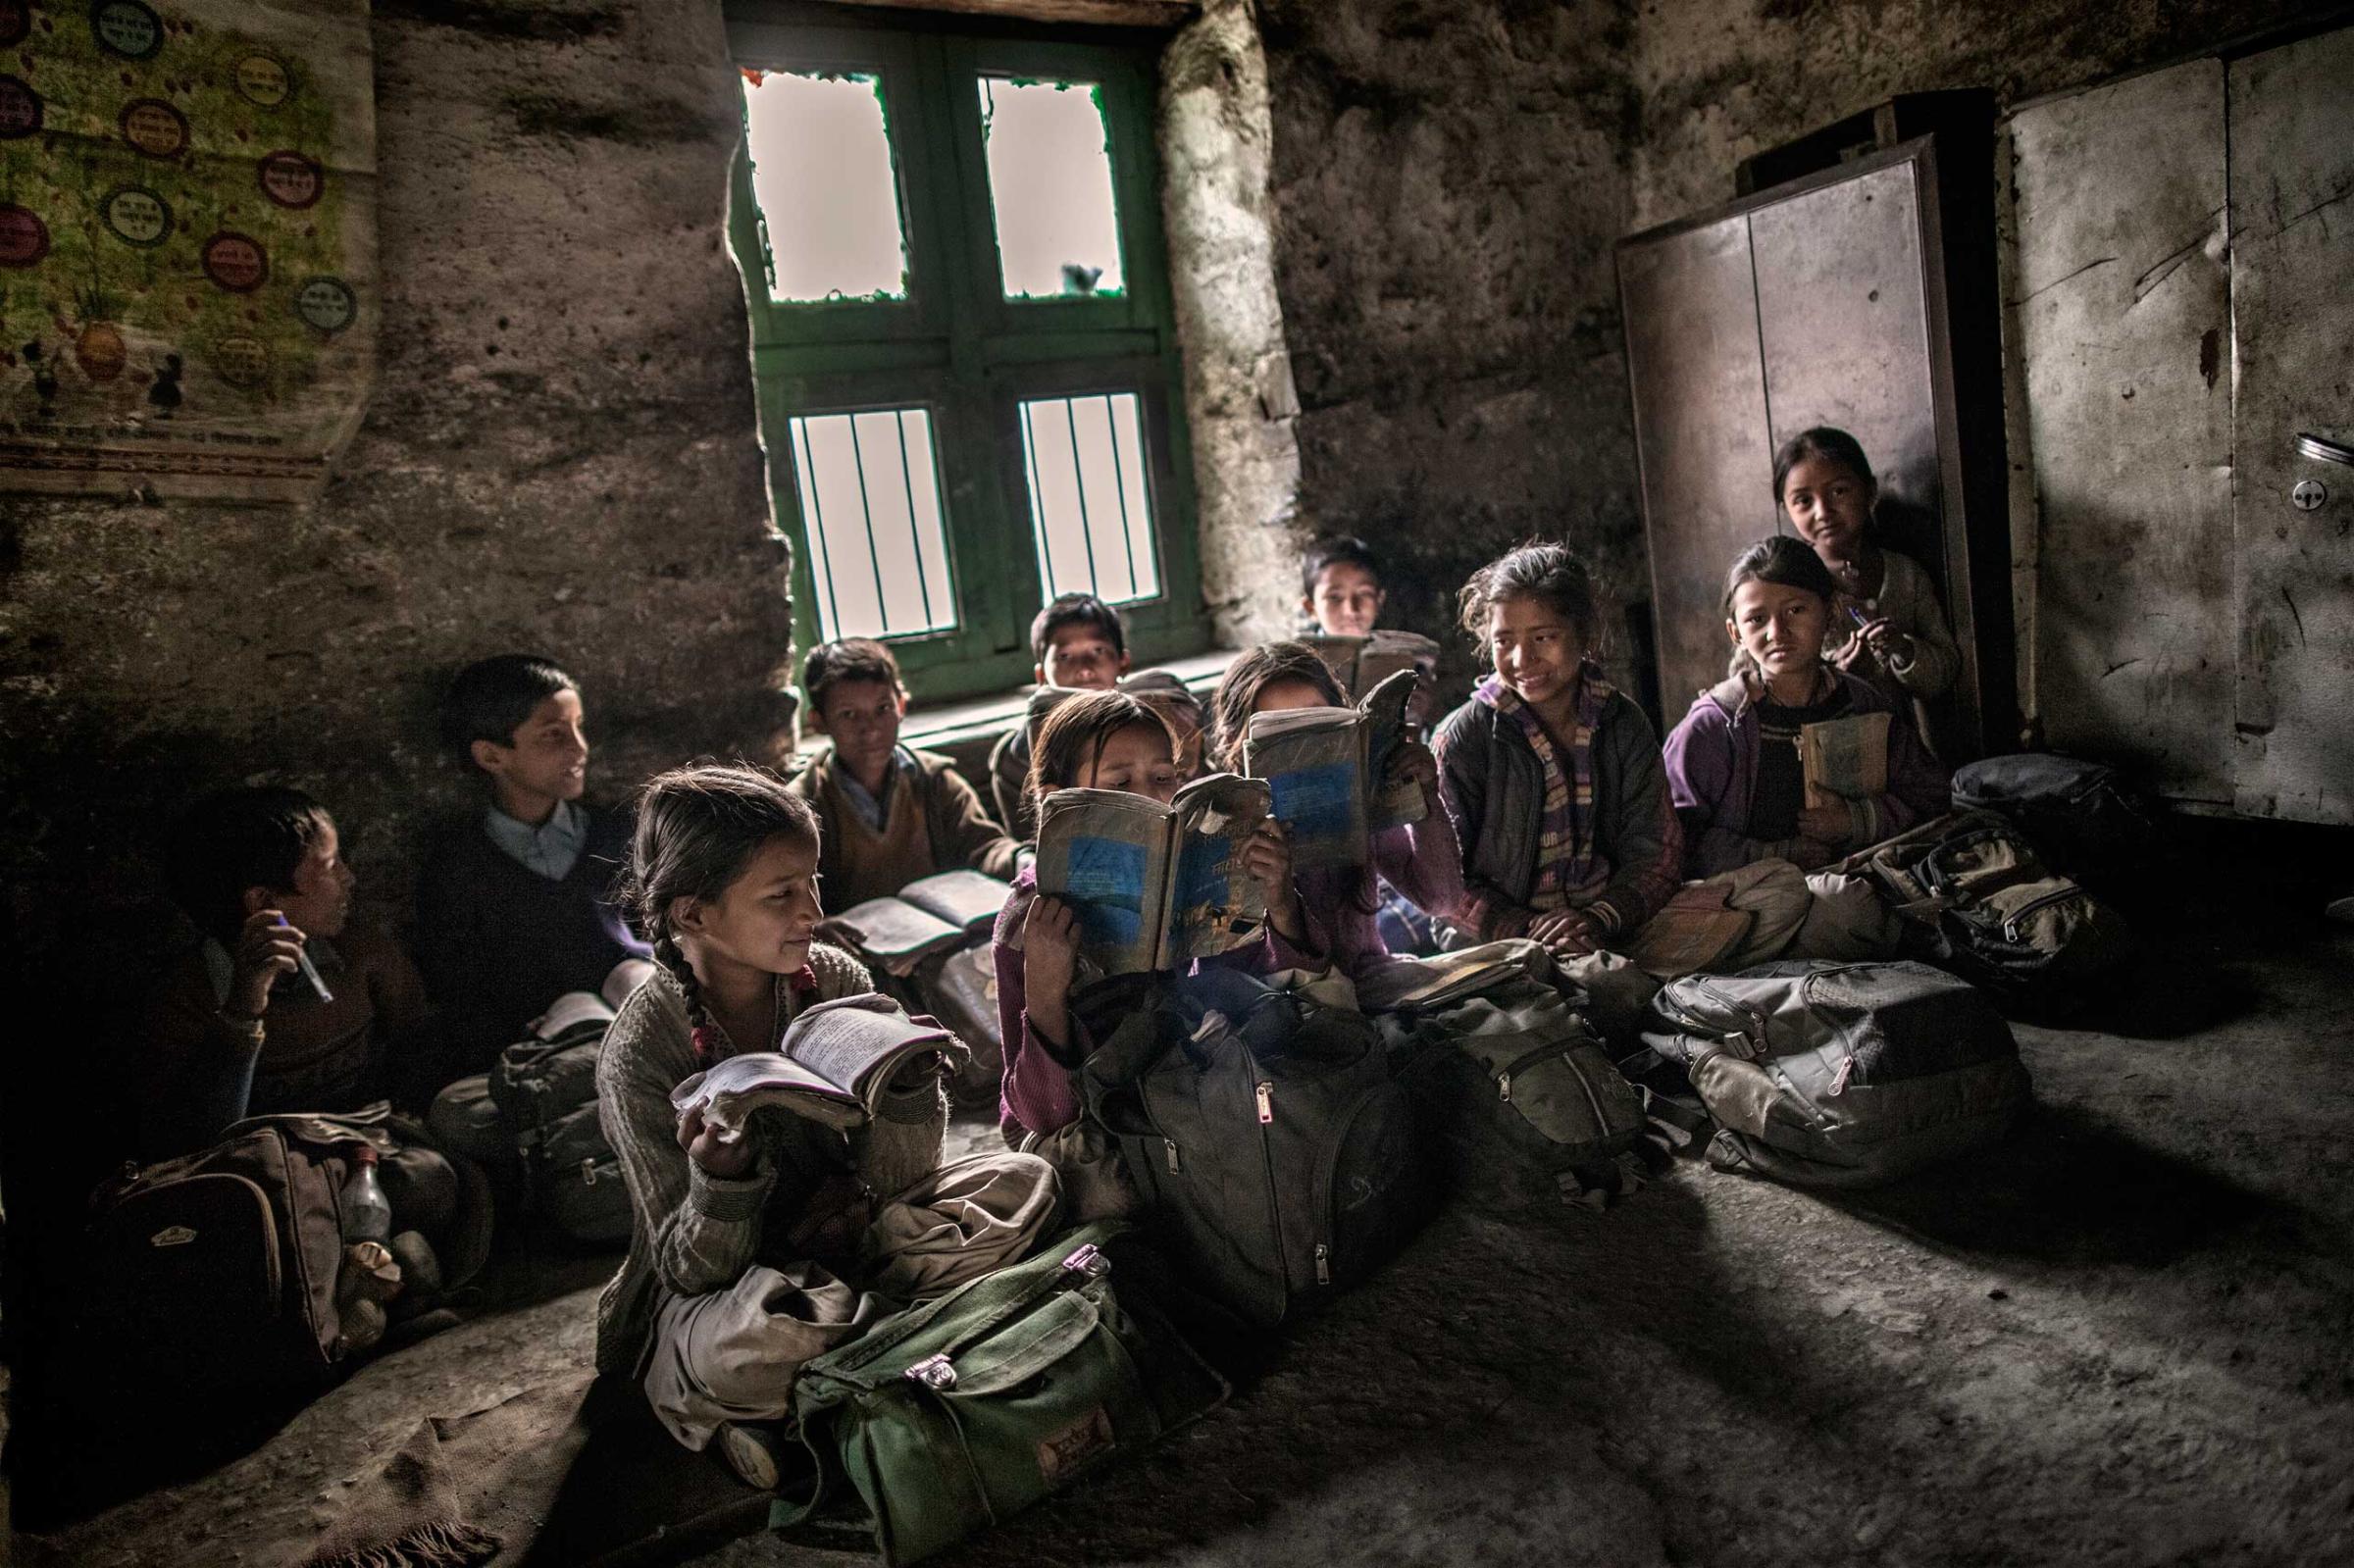 Young school children sit inside a classroom during a lesson in Dec. 2014.